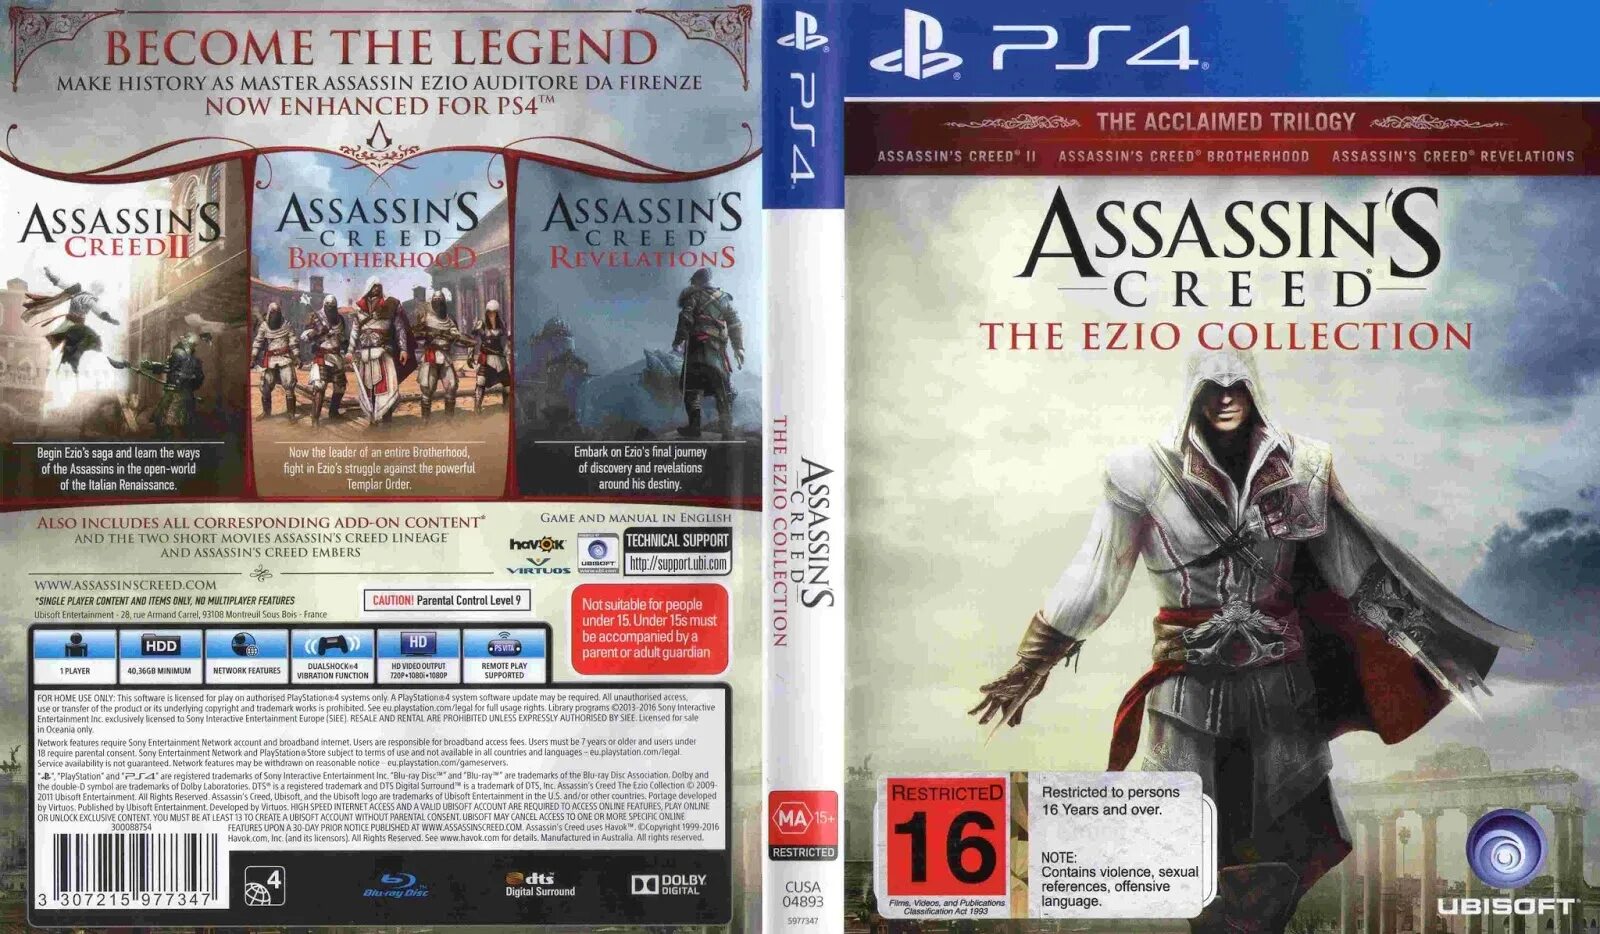 Assassin s ezio collection. Ps4 диск Assassins Creed. Ассасин Крид диск на ПС 4. Assassin's Creed the Ezio ps4 диск. Assassin's Creed Ezio collection ps4 диск.